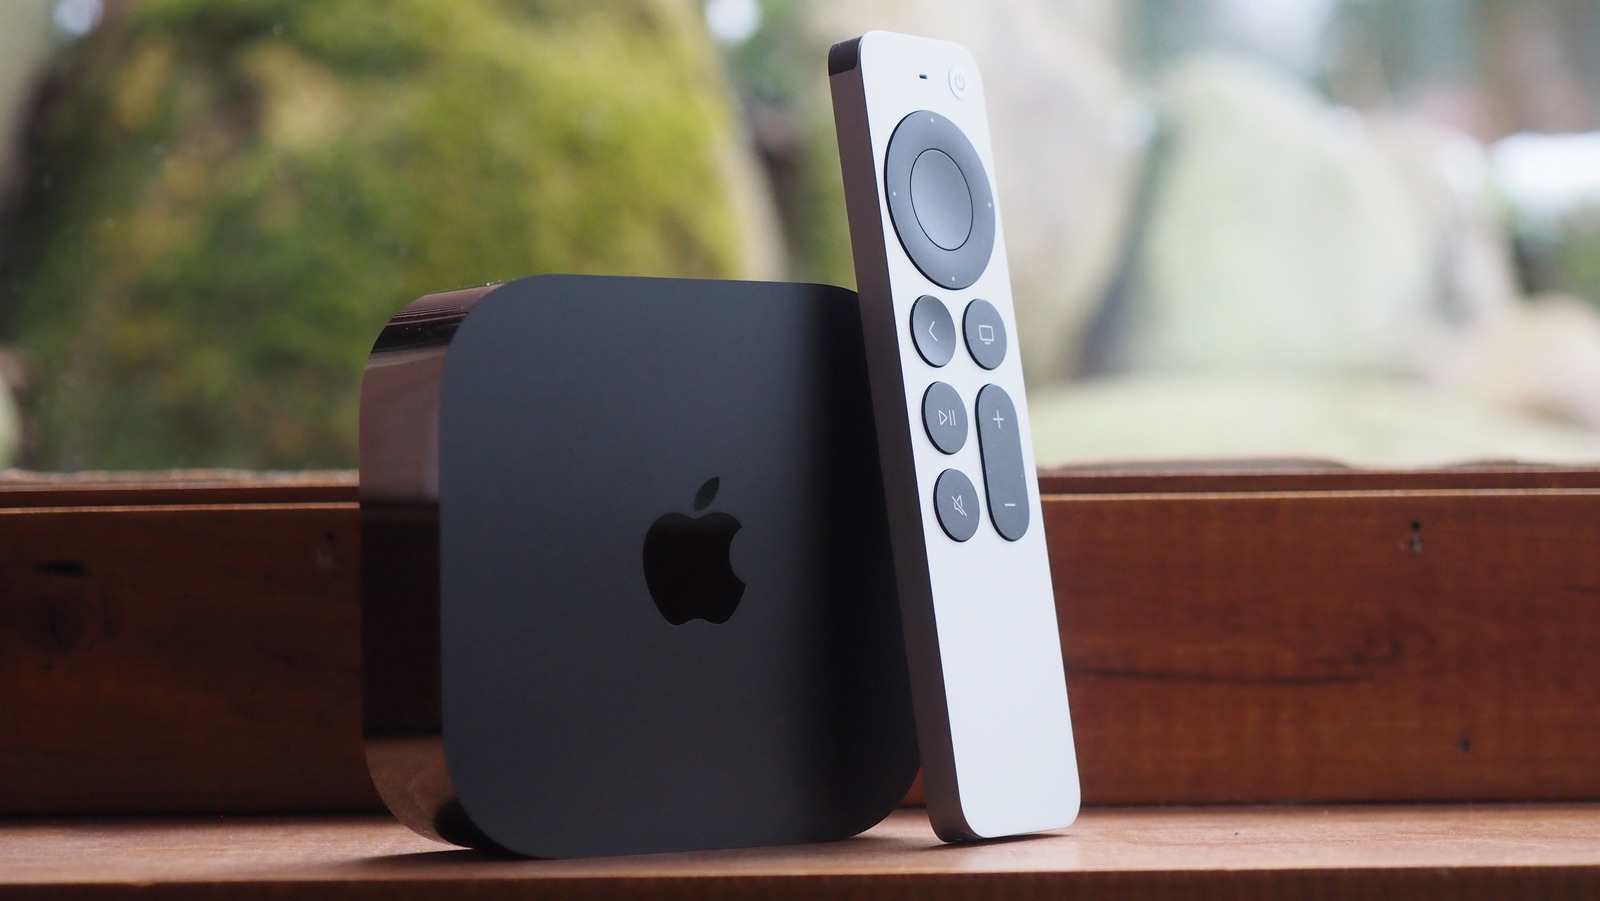 Apple TV Is More It Why Paying 4K Review Worth Generation): (3rd